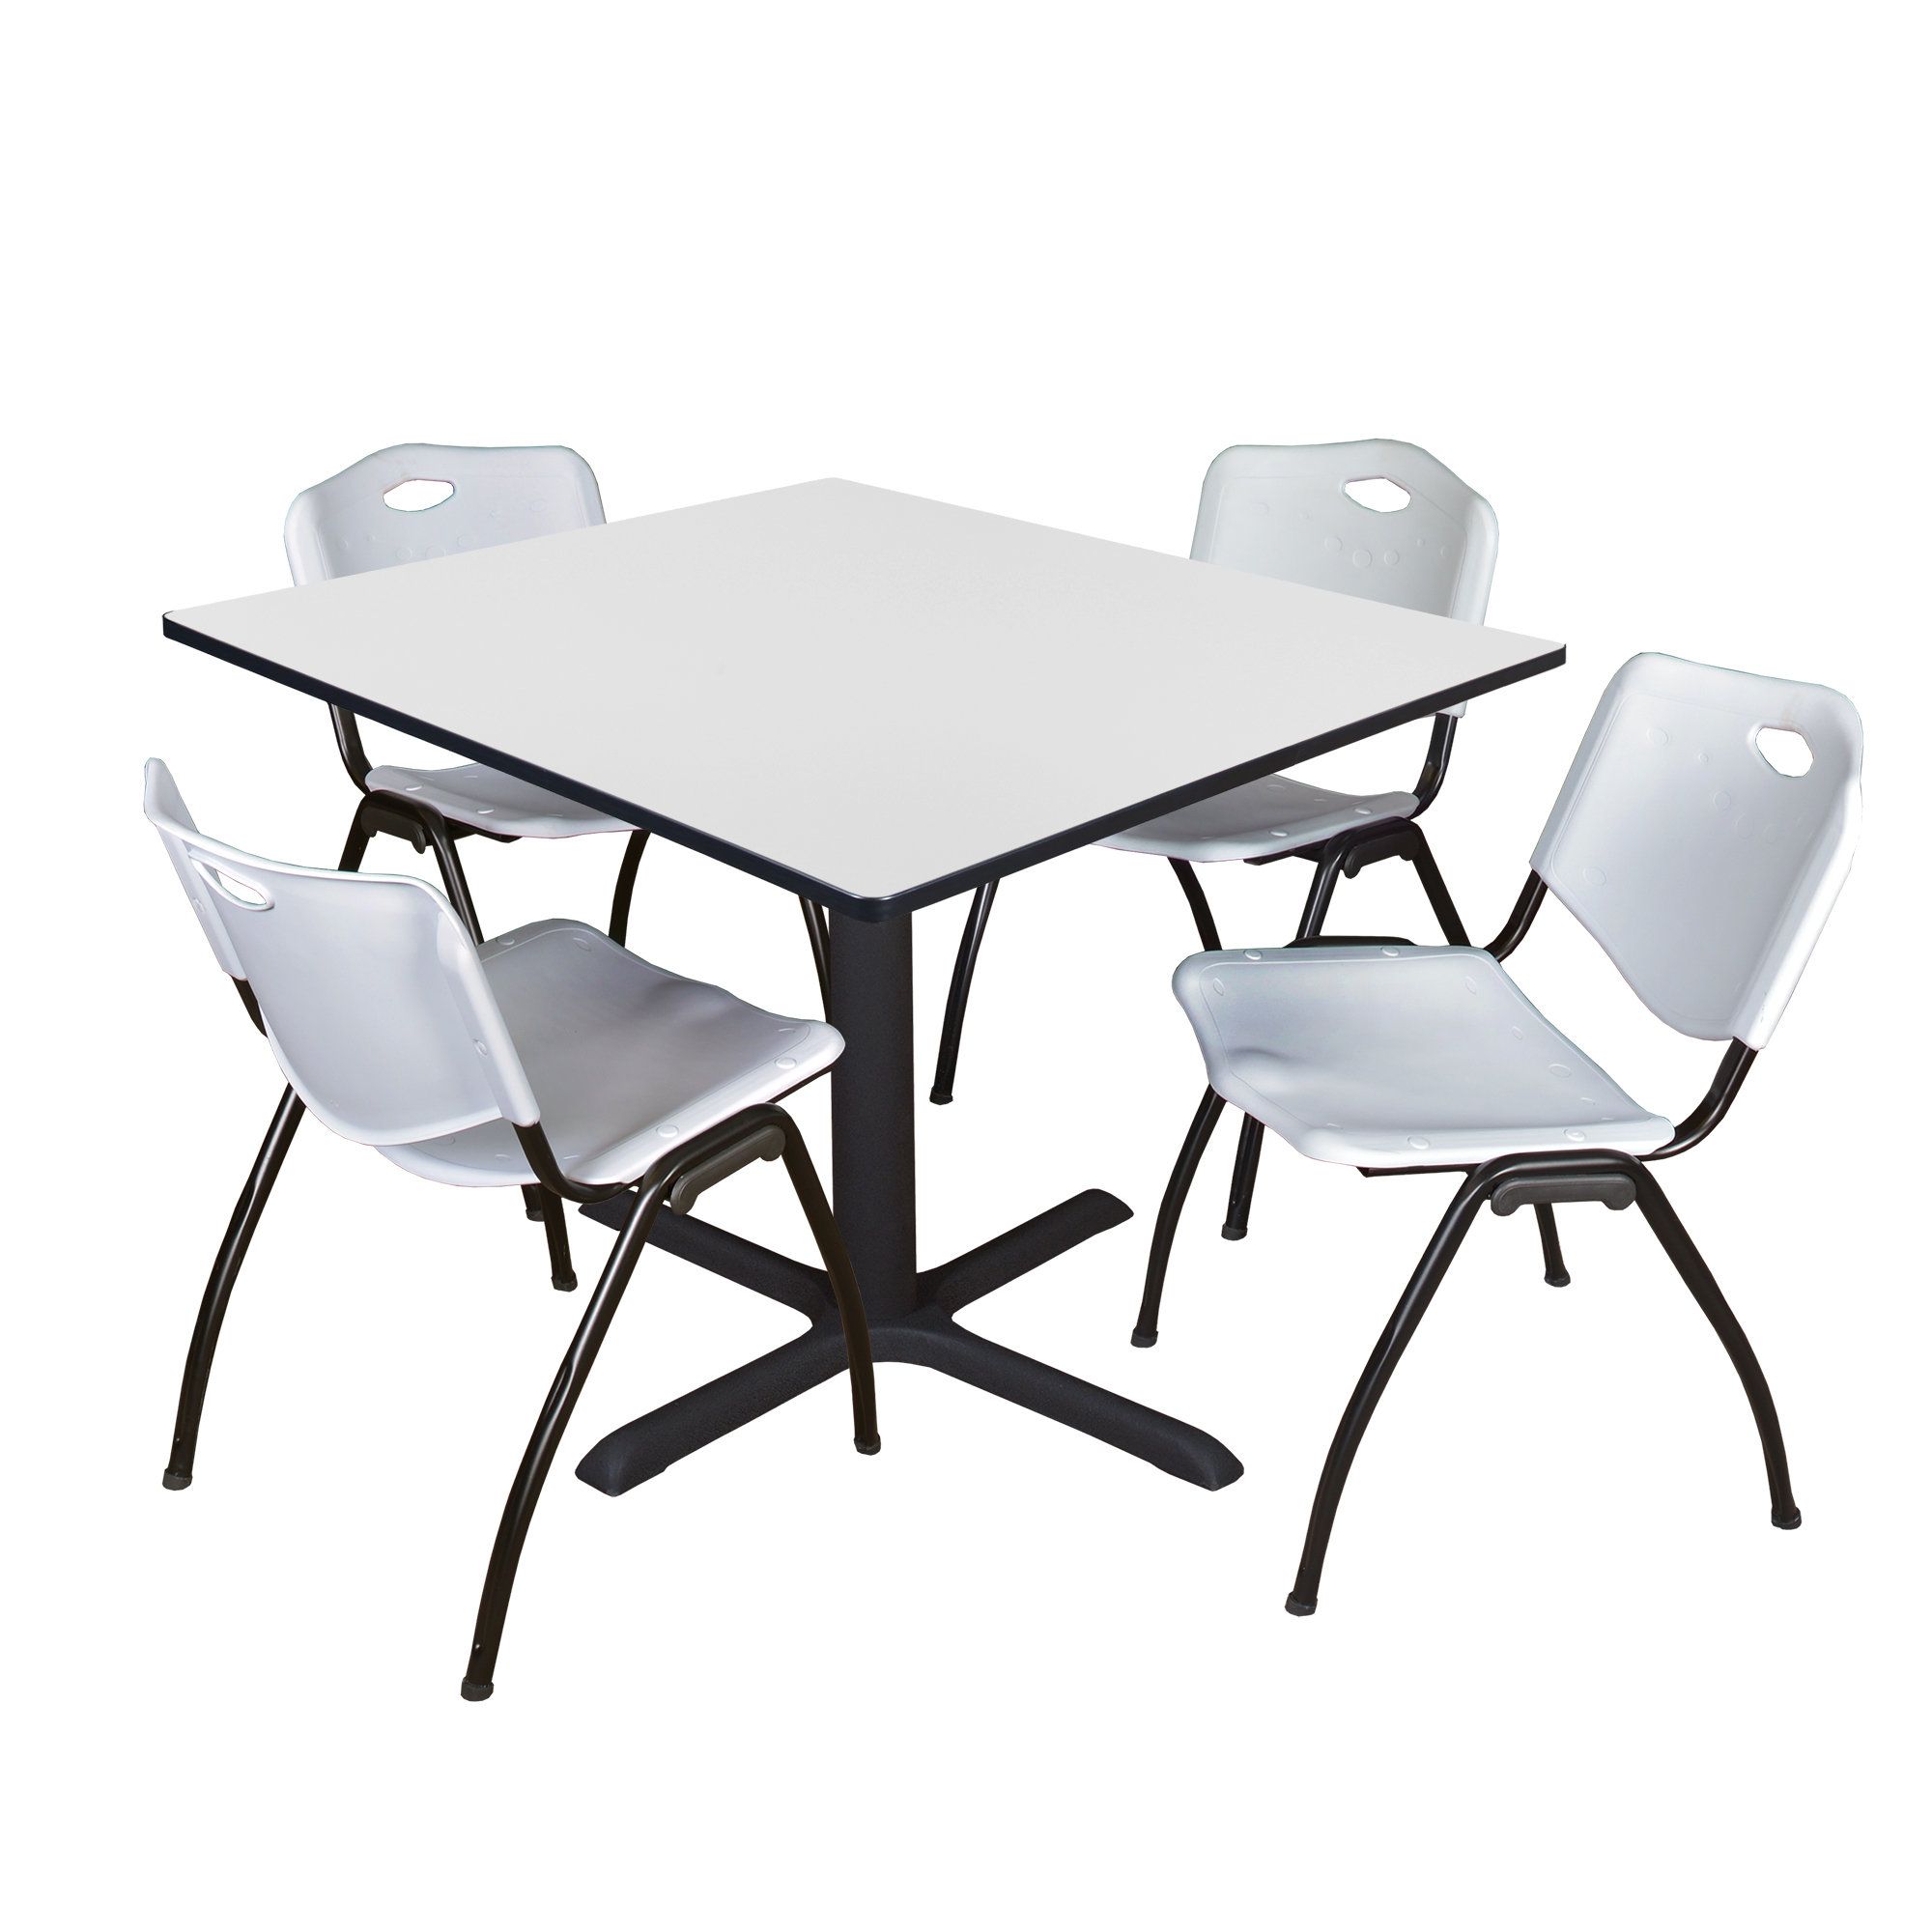 Regency Cain Square Breakroom Table & 4 M Stack Chairs | Wayfair With Regard To Regency Cain Steel Coffee Tables (View 14 of 15)